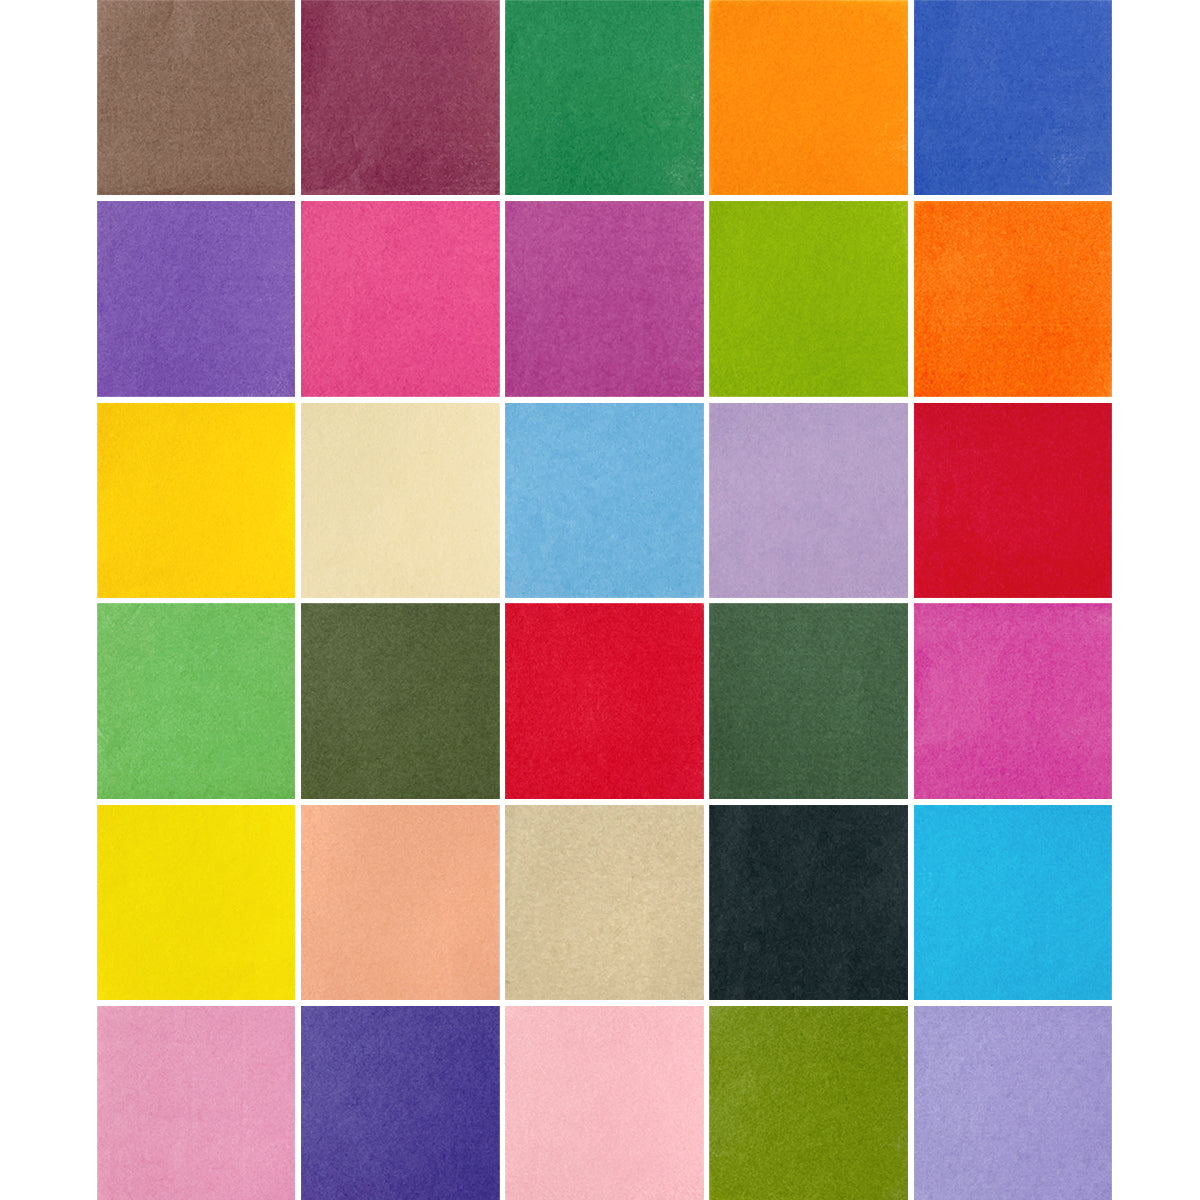 2400 Sheets Tissue Paper Squares - 24 Colors for UK